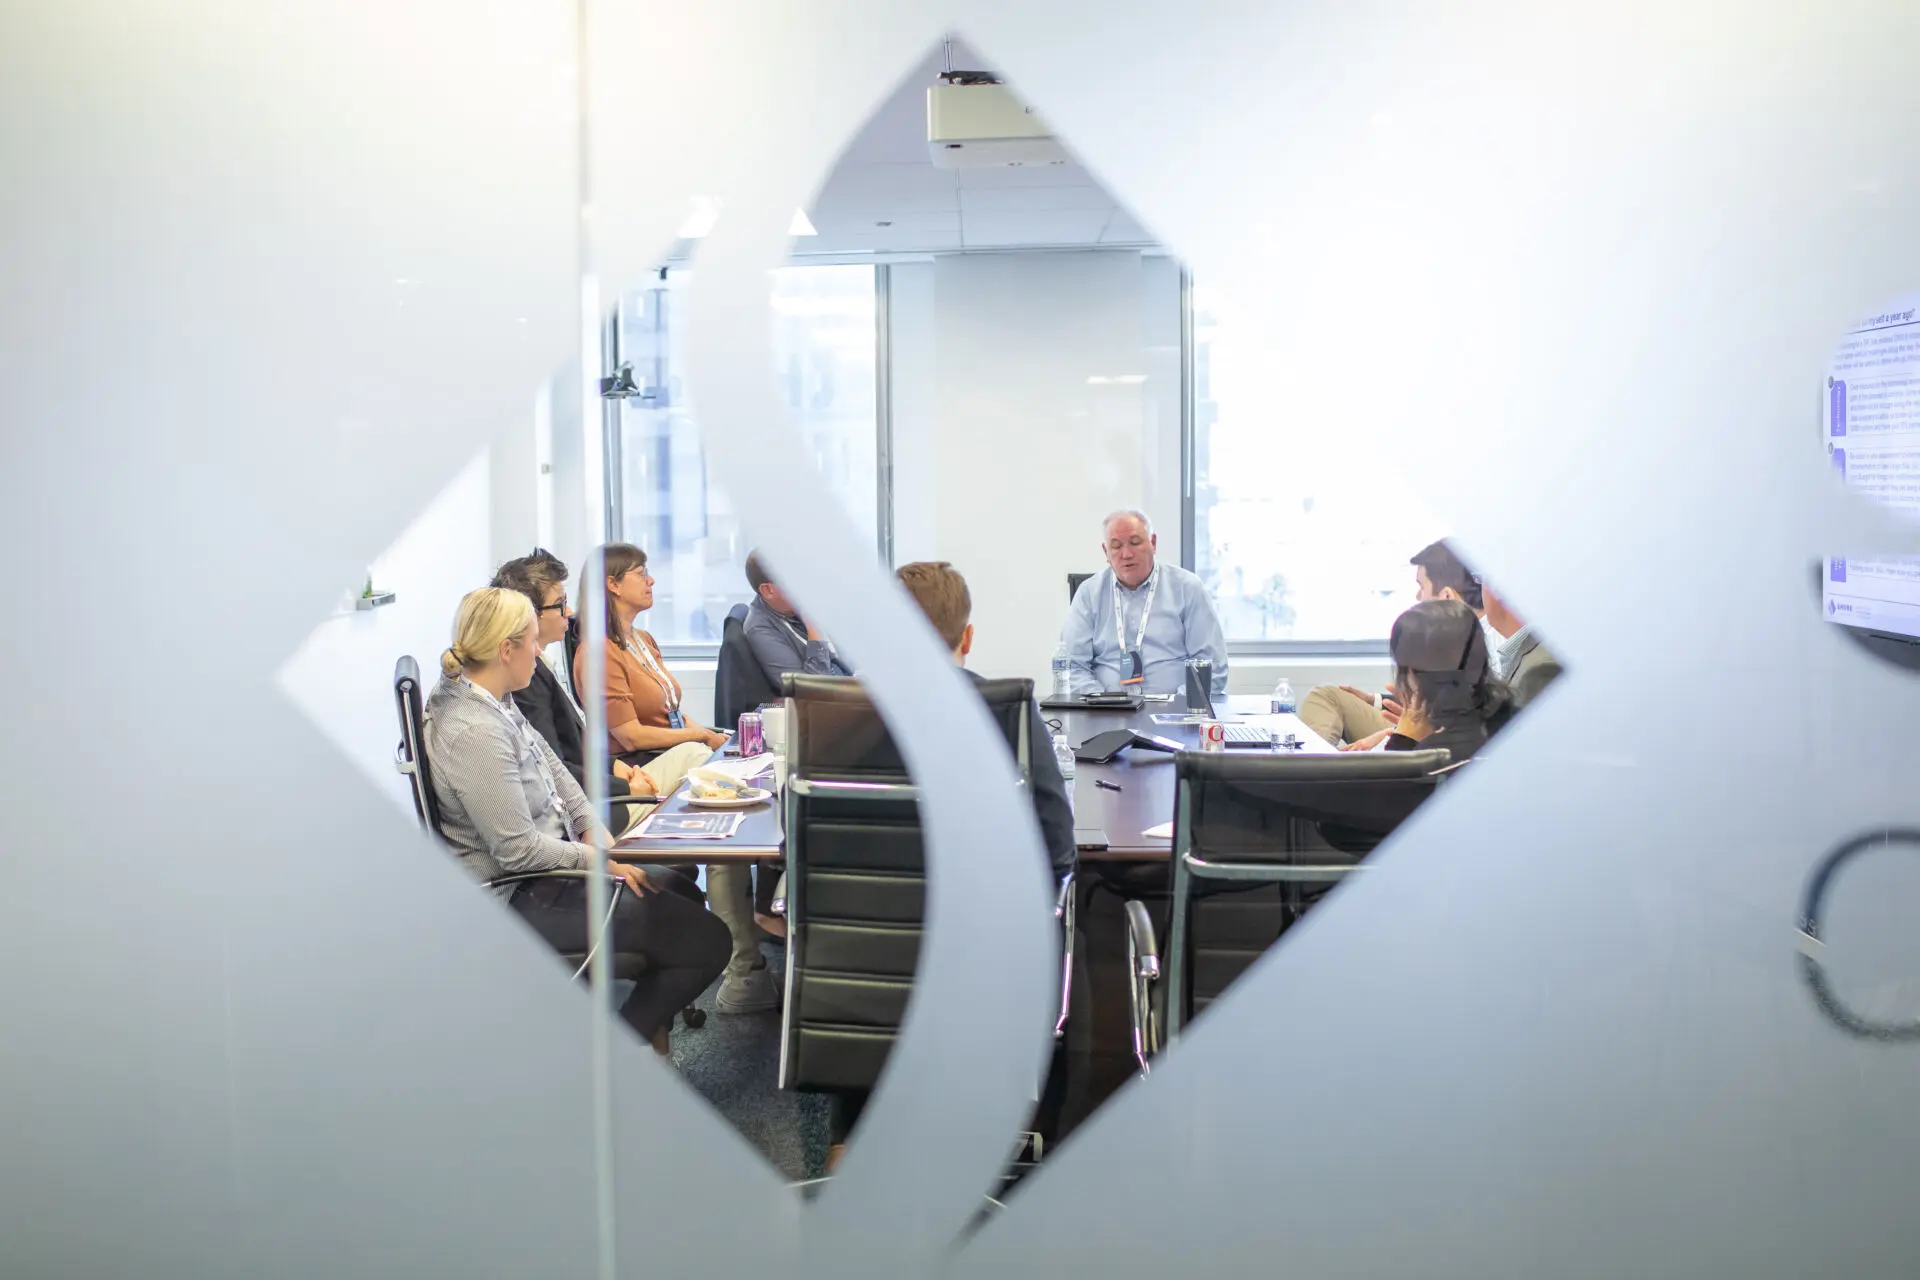 Conference Room Meeting visible through frame of Shore Capital Partners Logo on frosted glass doors